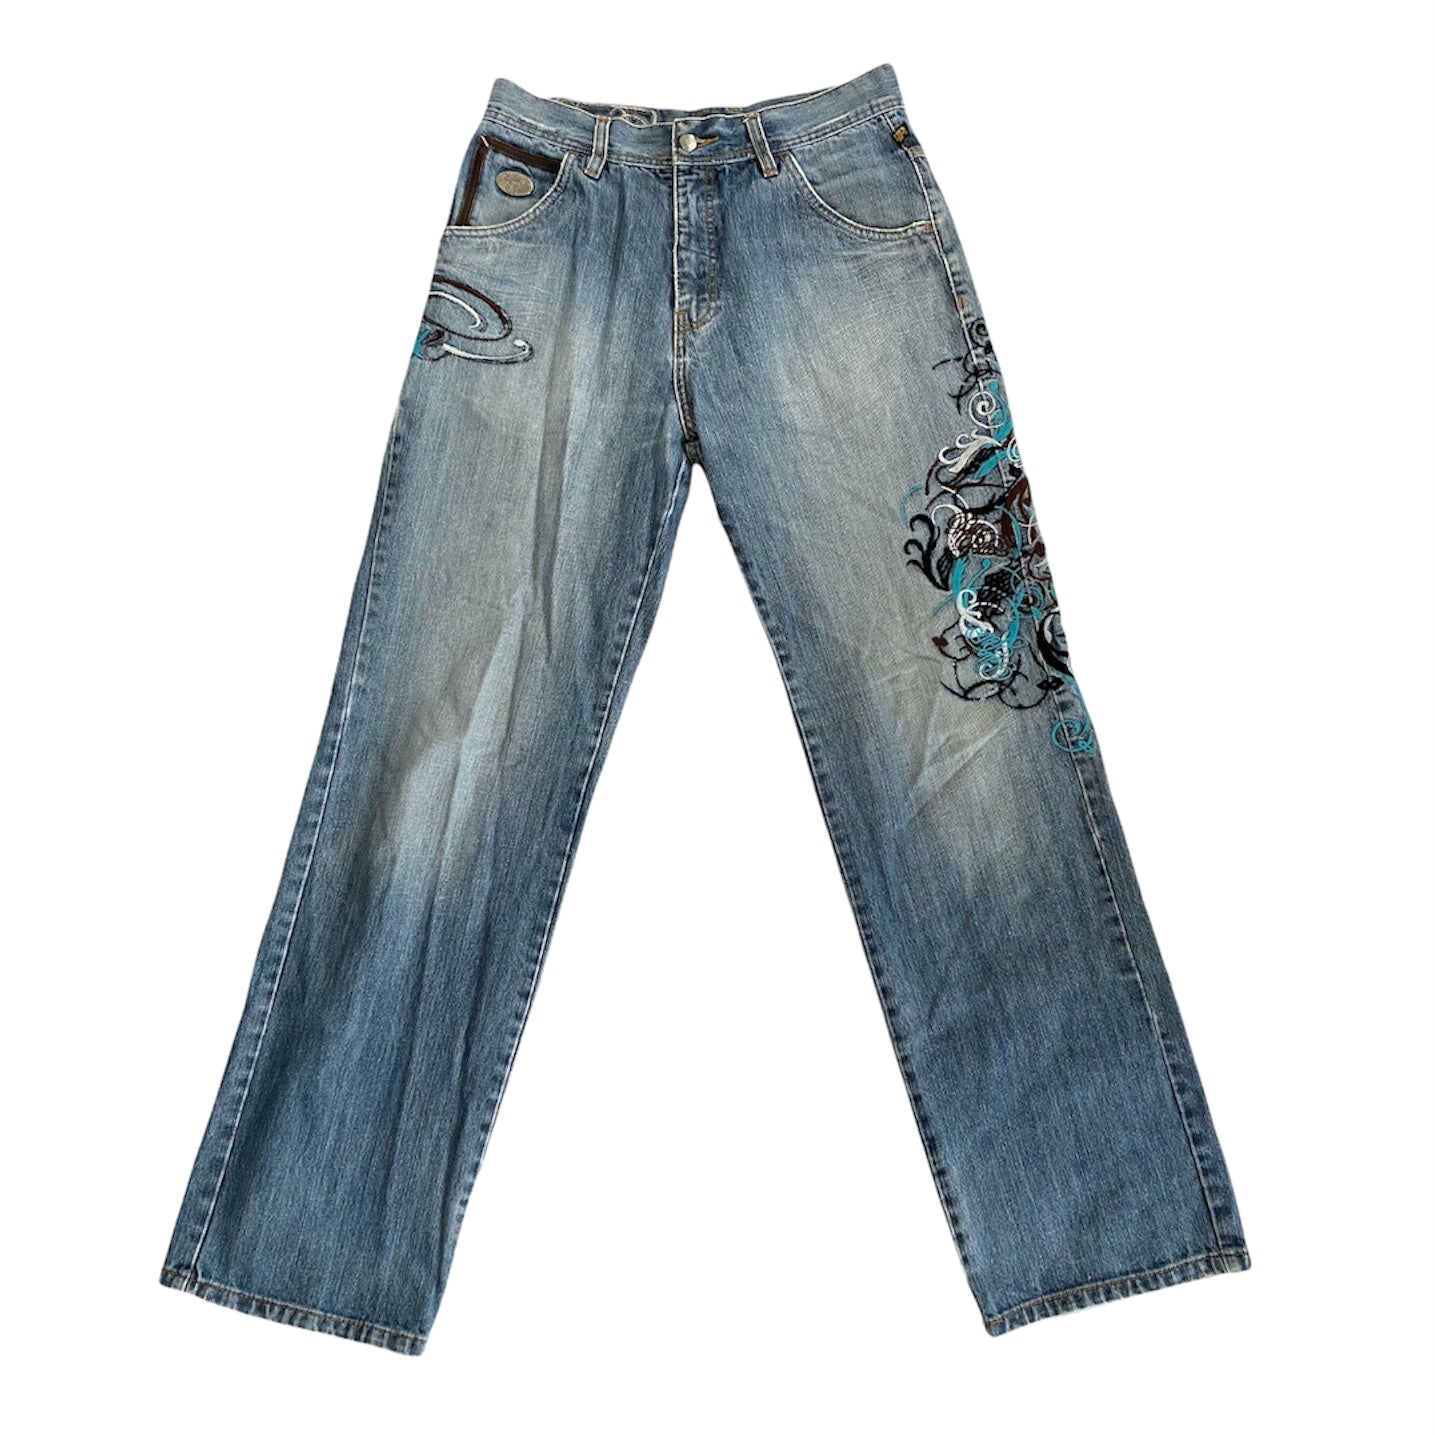 Rare Pelle Pelle Embroidered Baggy Jeans